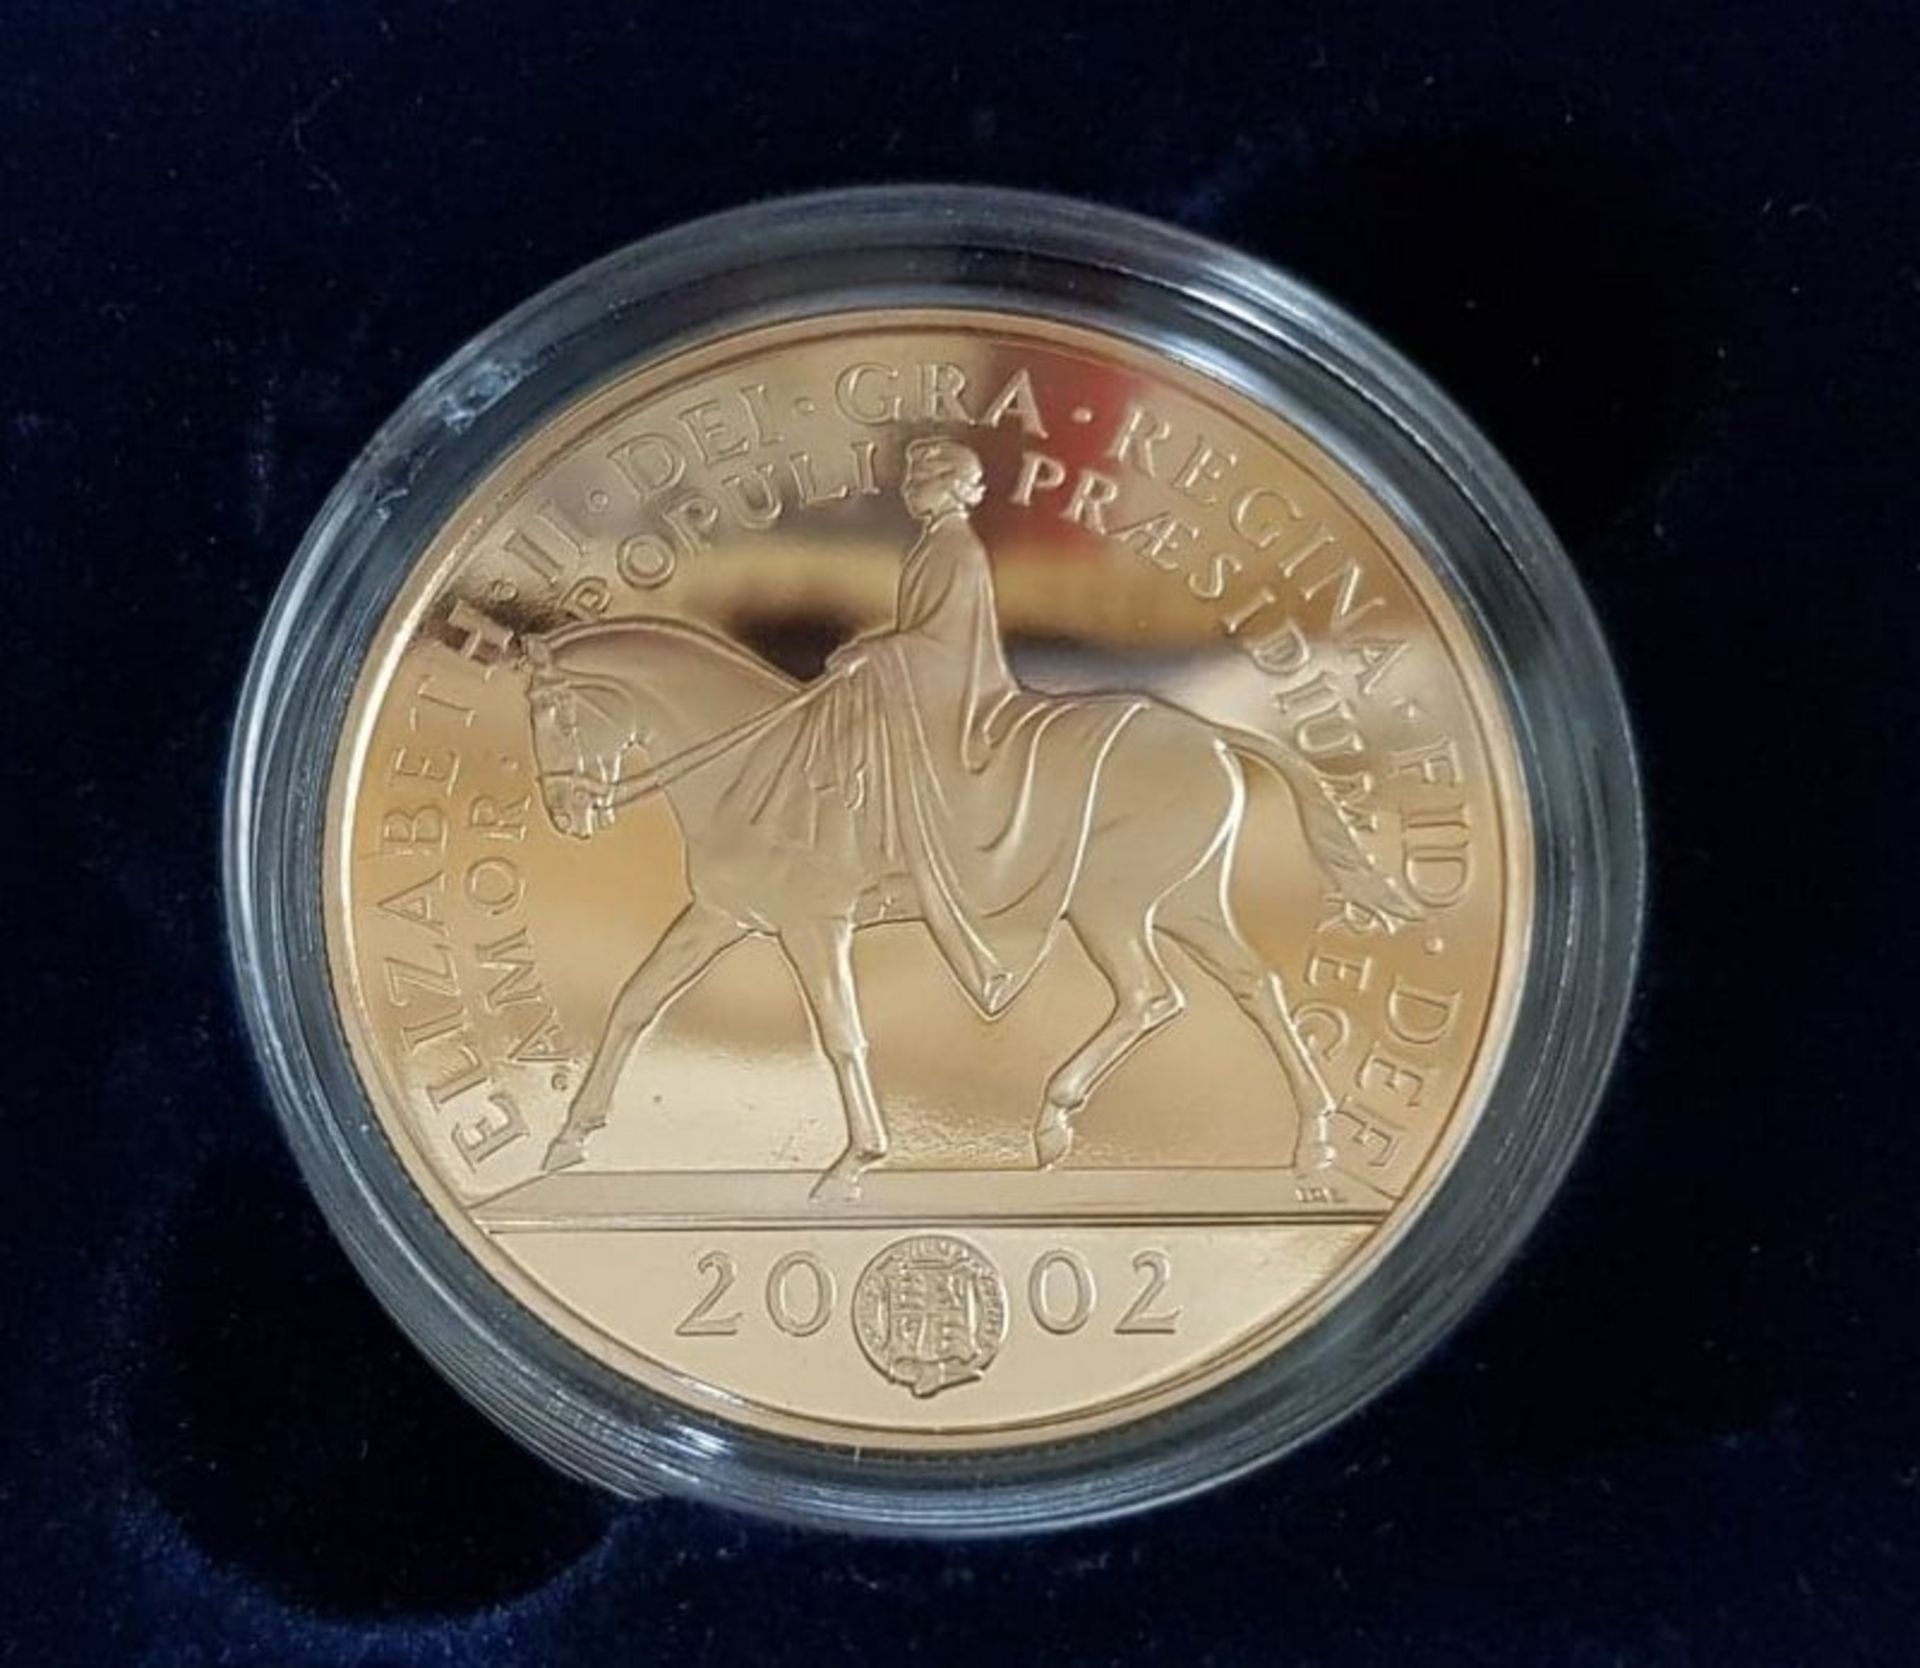 2002 - Gold Five Pound Proof Coin, Golden Jubilee Boxed - Image 2 of 6